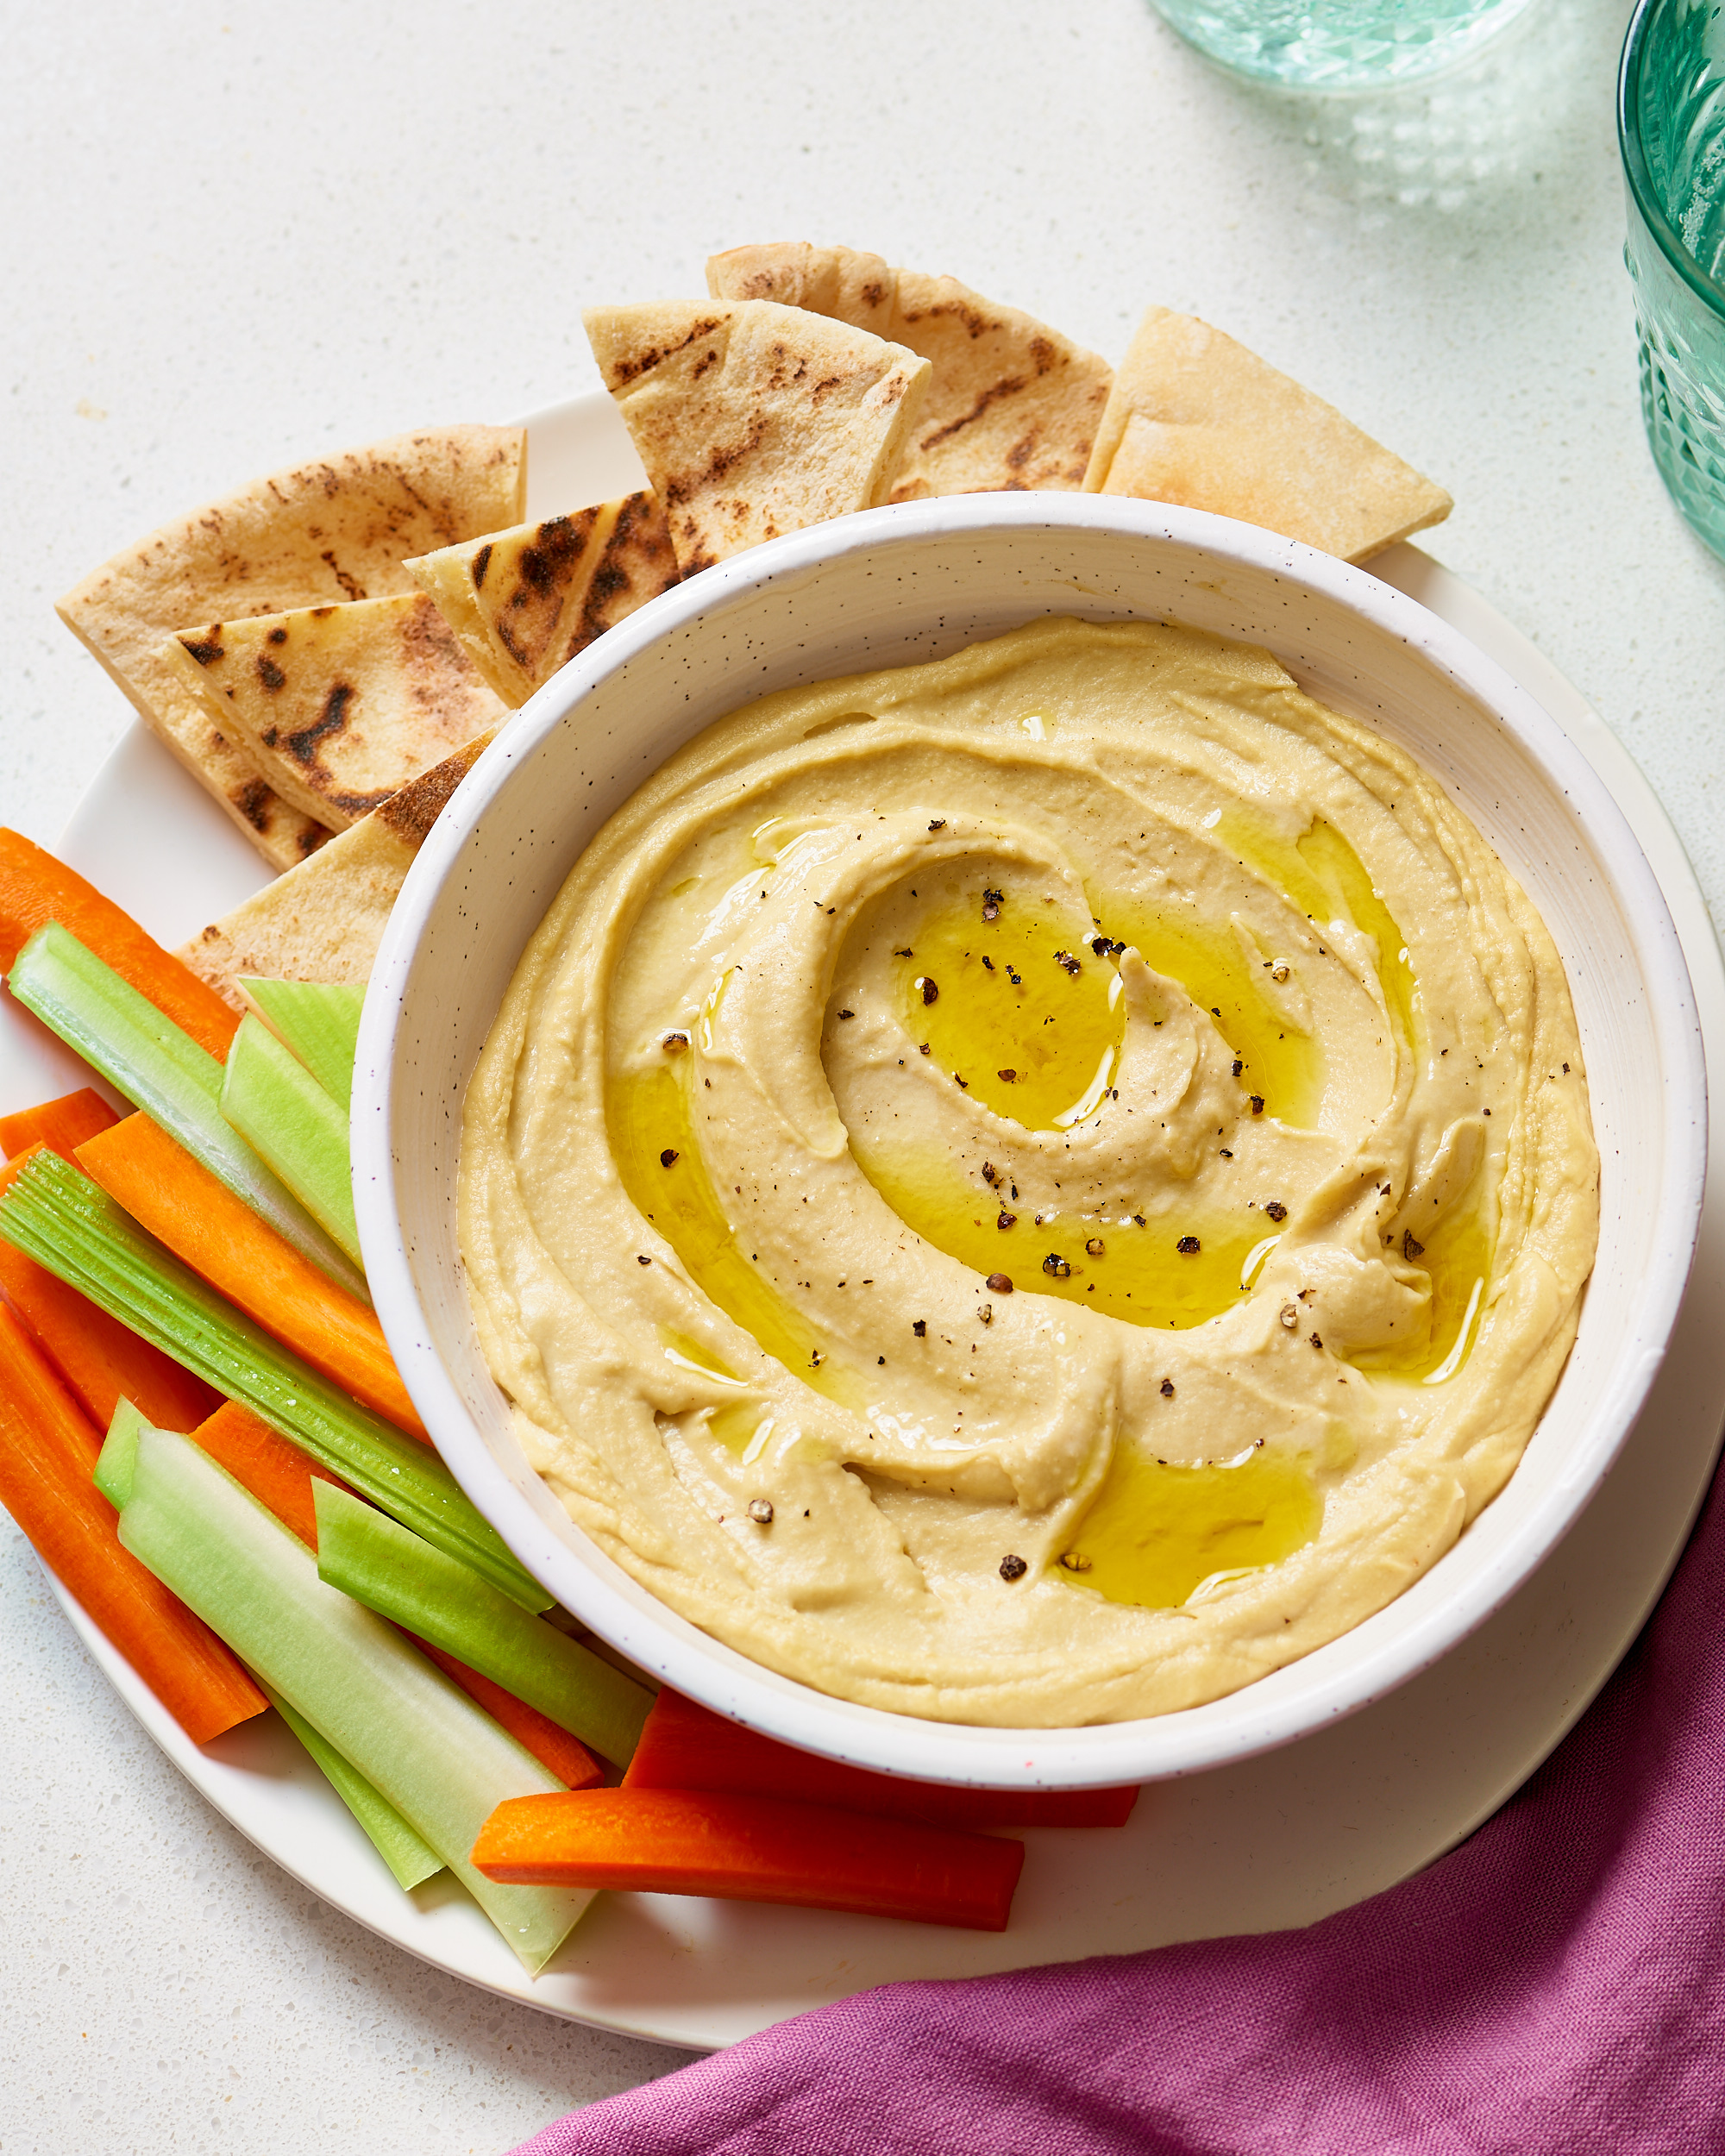 How to Make Hummus (Easy From-Scratch Recipe) | Kitchn